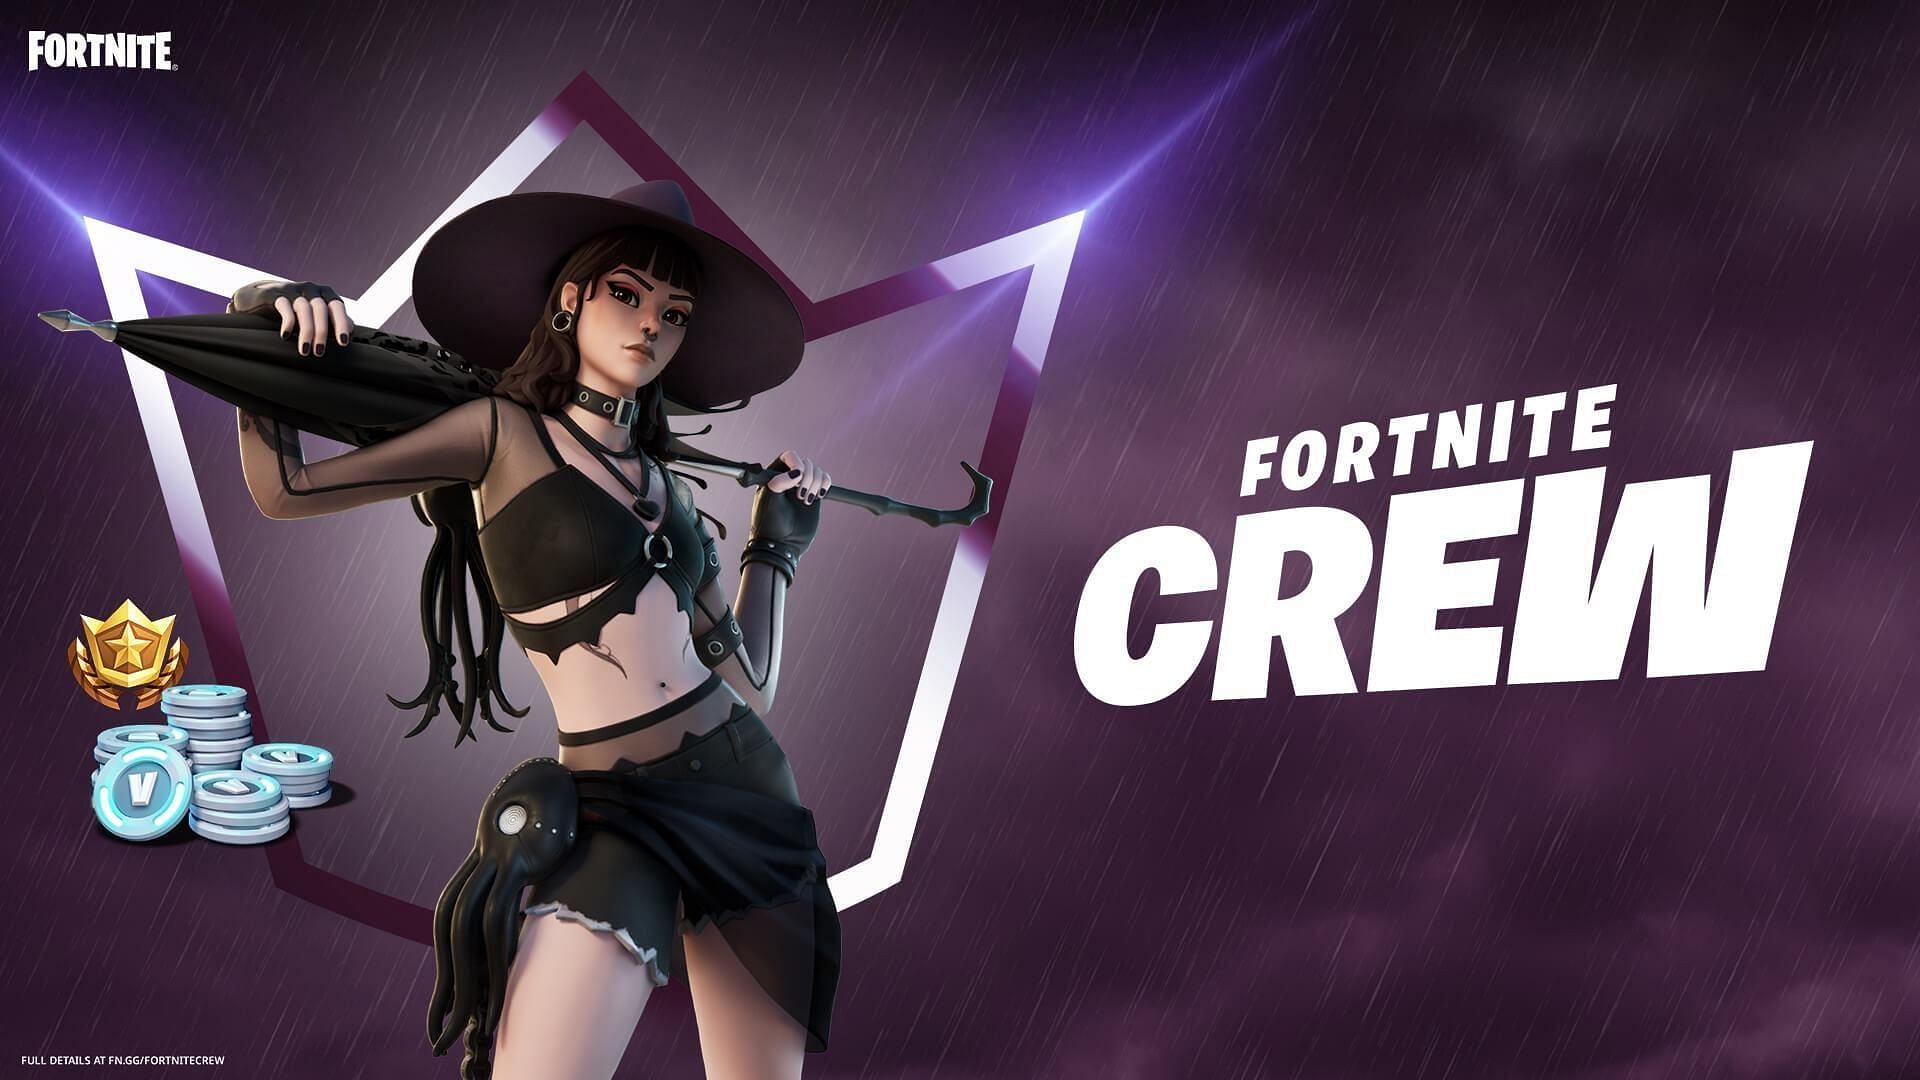 Phaedra is already one of the most popular Crew skins in Fortnite Battle Royale. (Image via Epic Games)